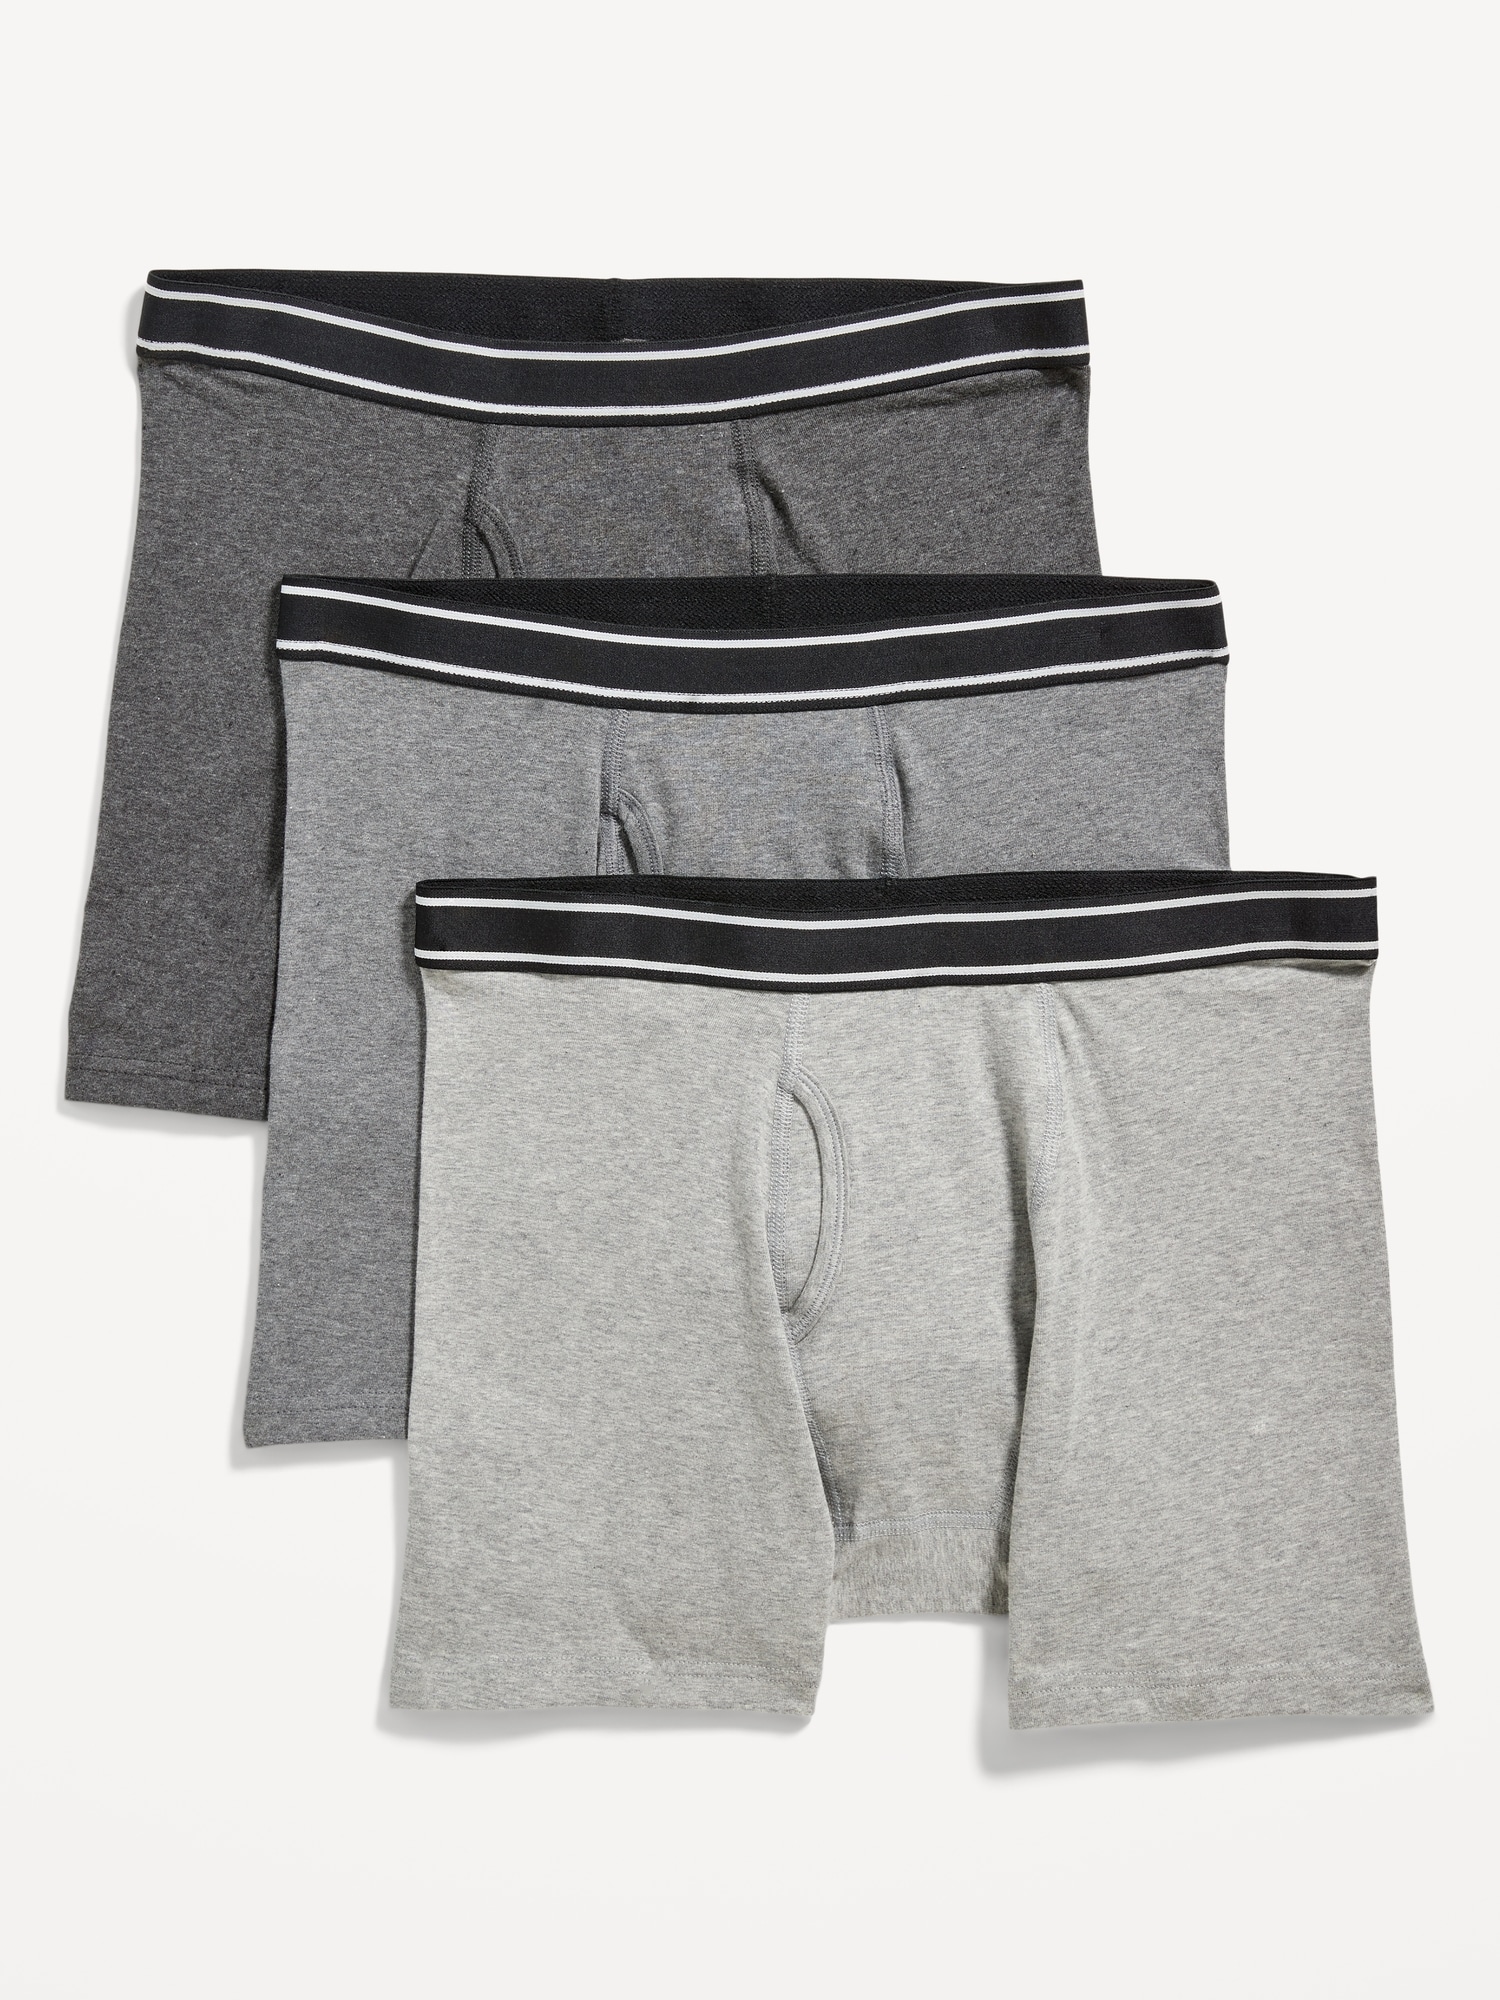 Old Navy Go-Dry Cool Performance Boxer-Brief Underwear 3-Pack for Men --  5-inch inseam